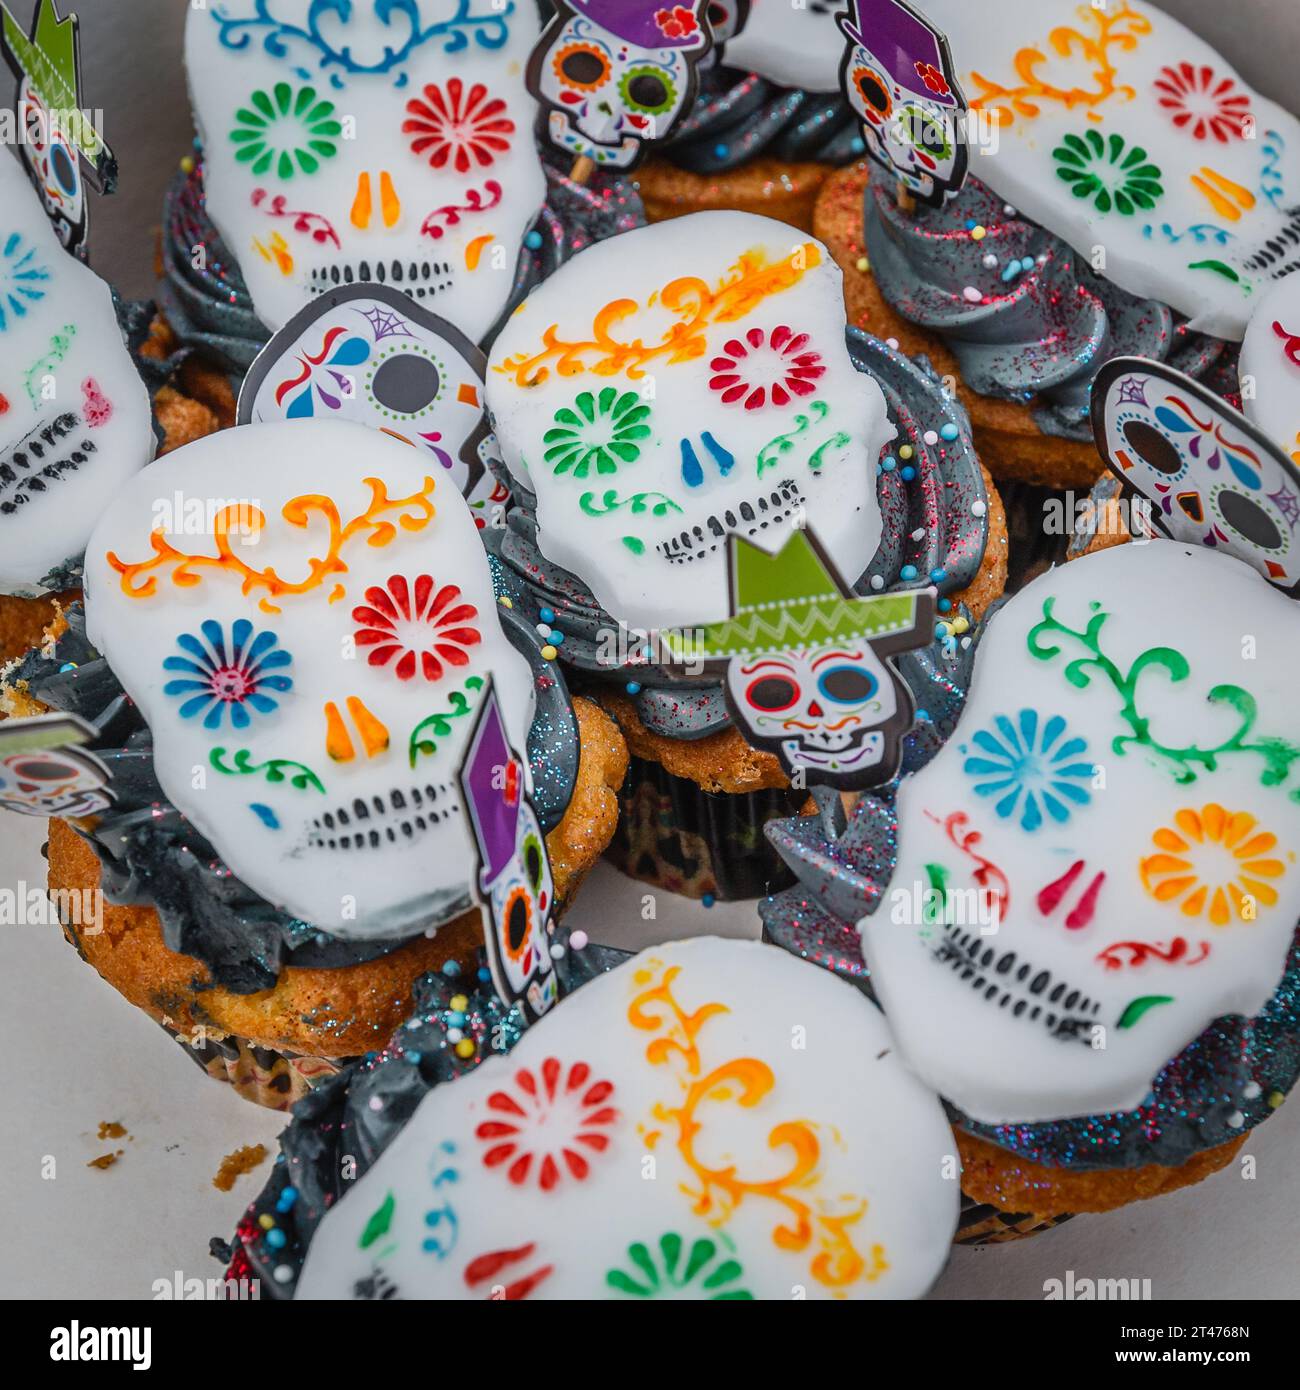 Muffins made for the day of the dead (el Día de los Muertos) event at the Columbia Road Flower Market in London. Stock Photo